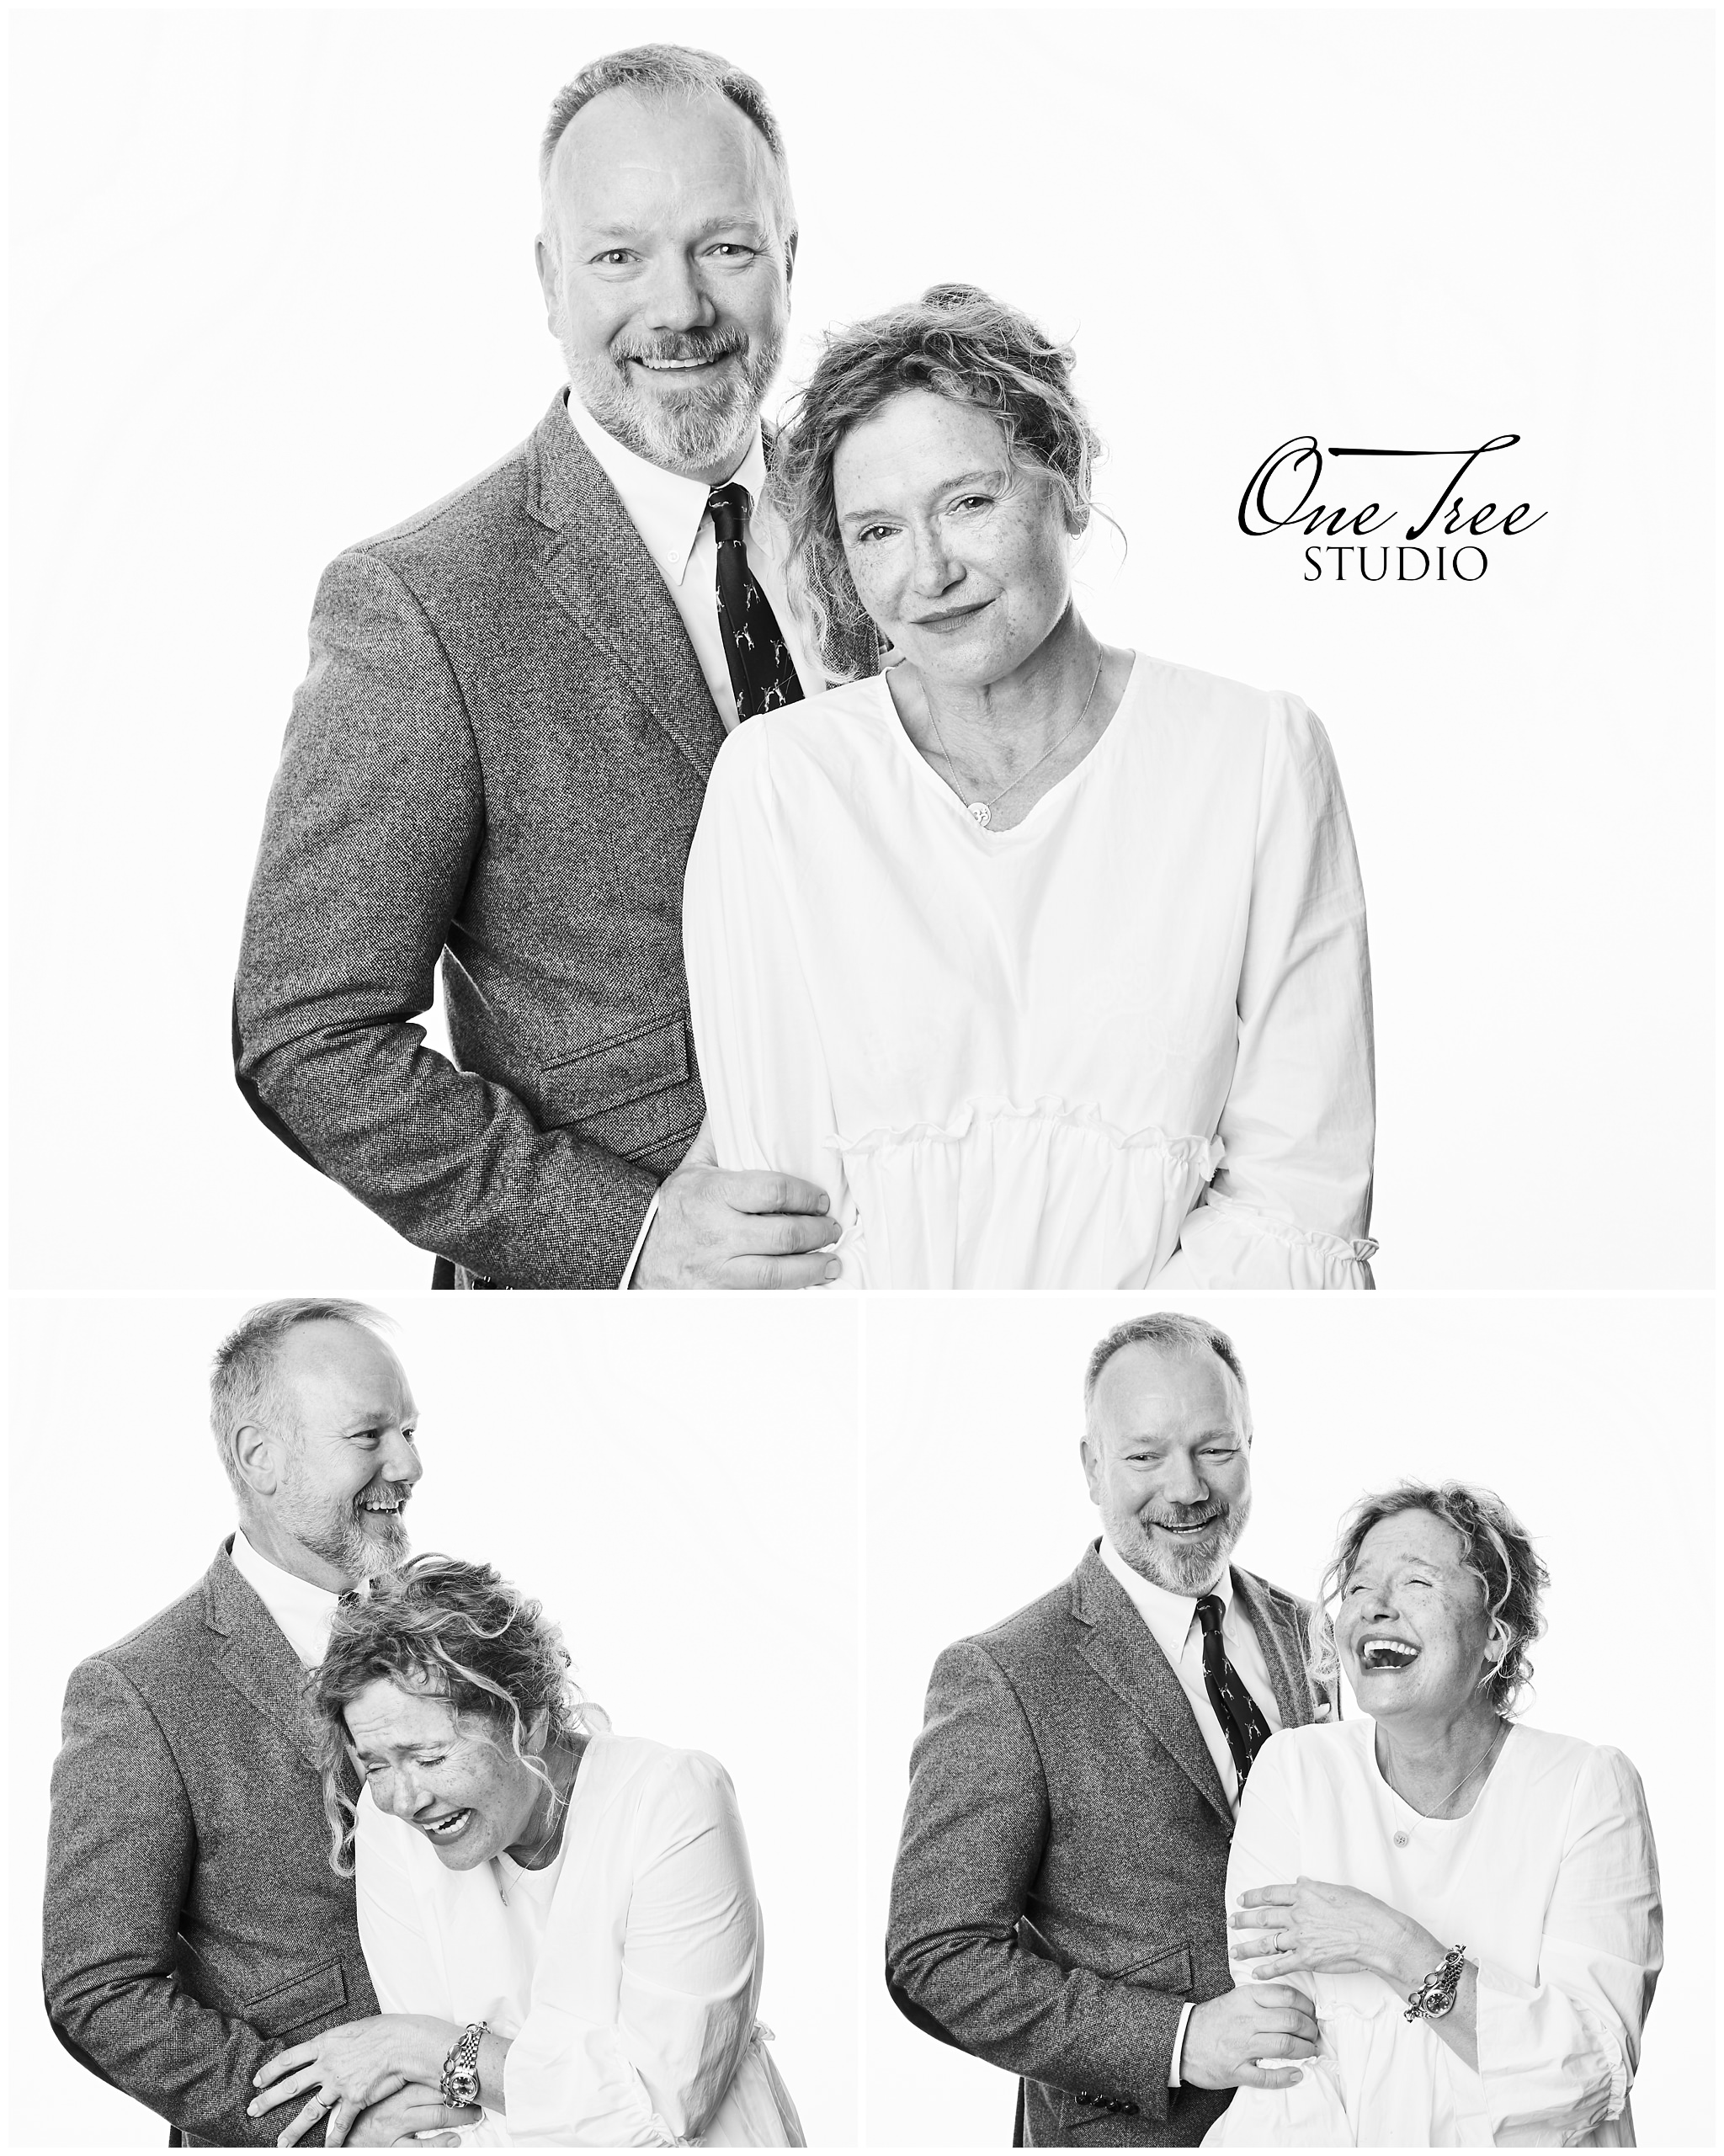 Black and White Event Portrait Photo Booth